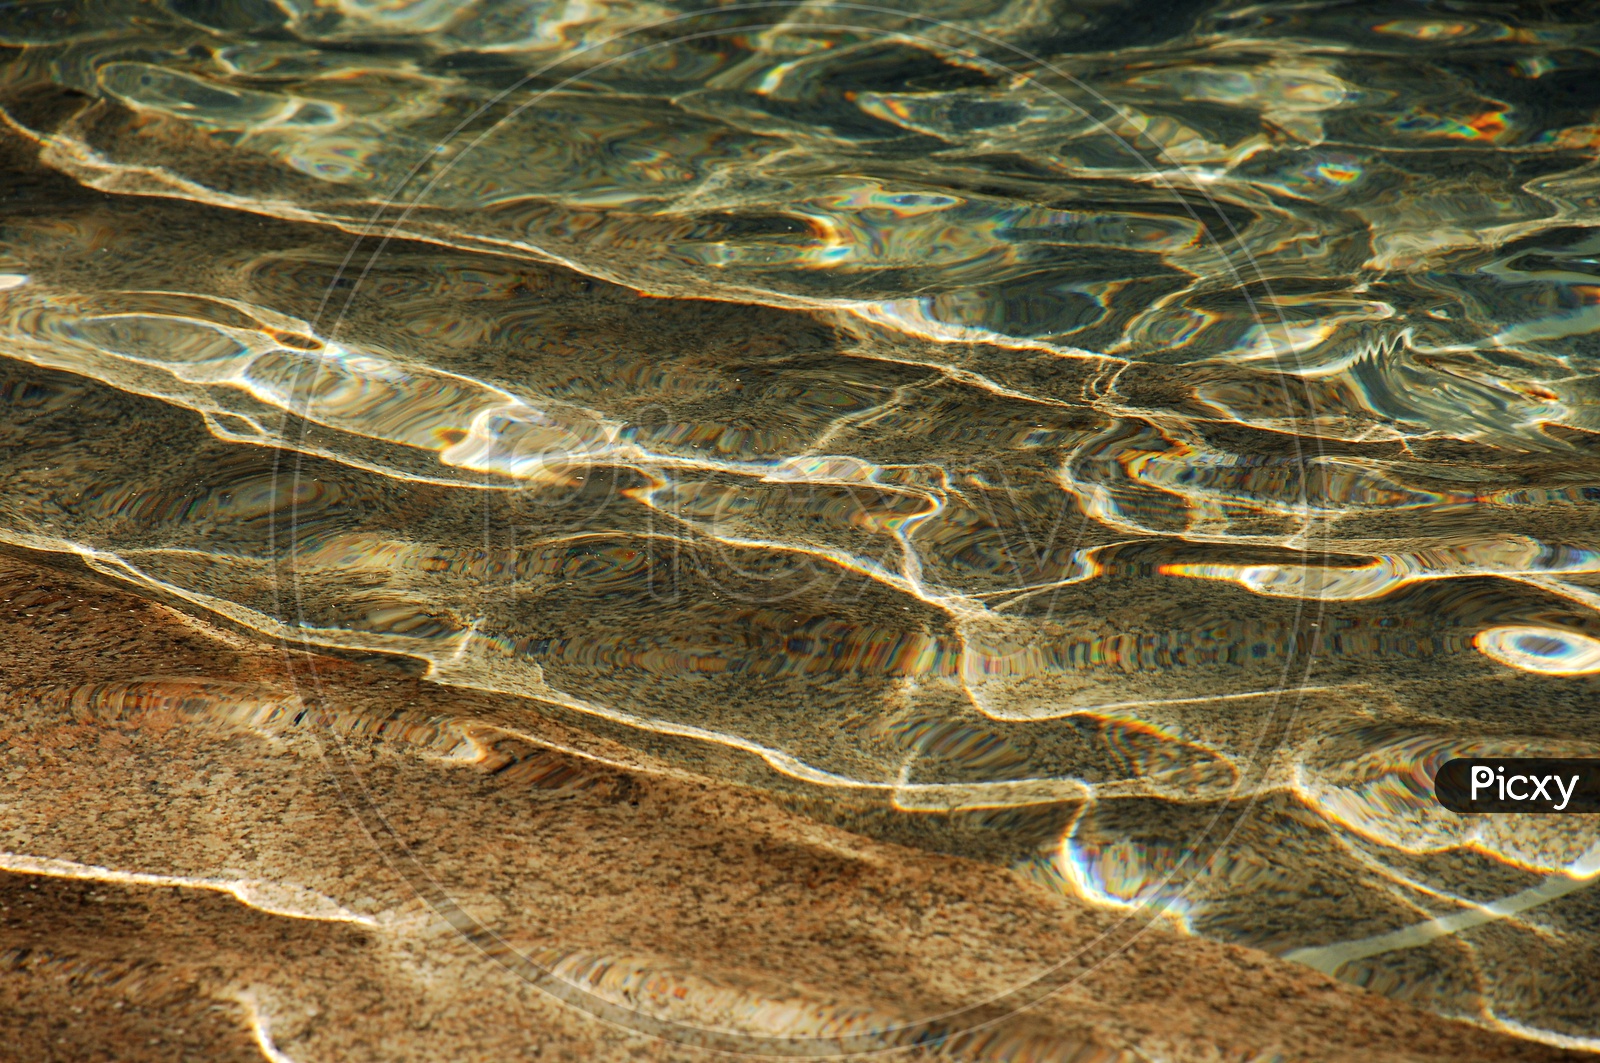 Transparent water on the sand